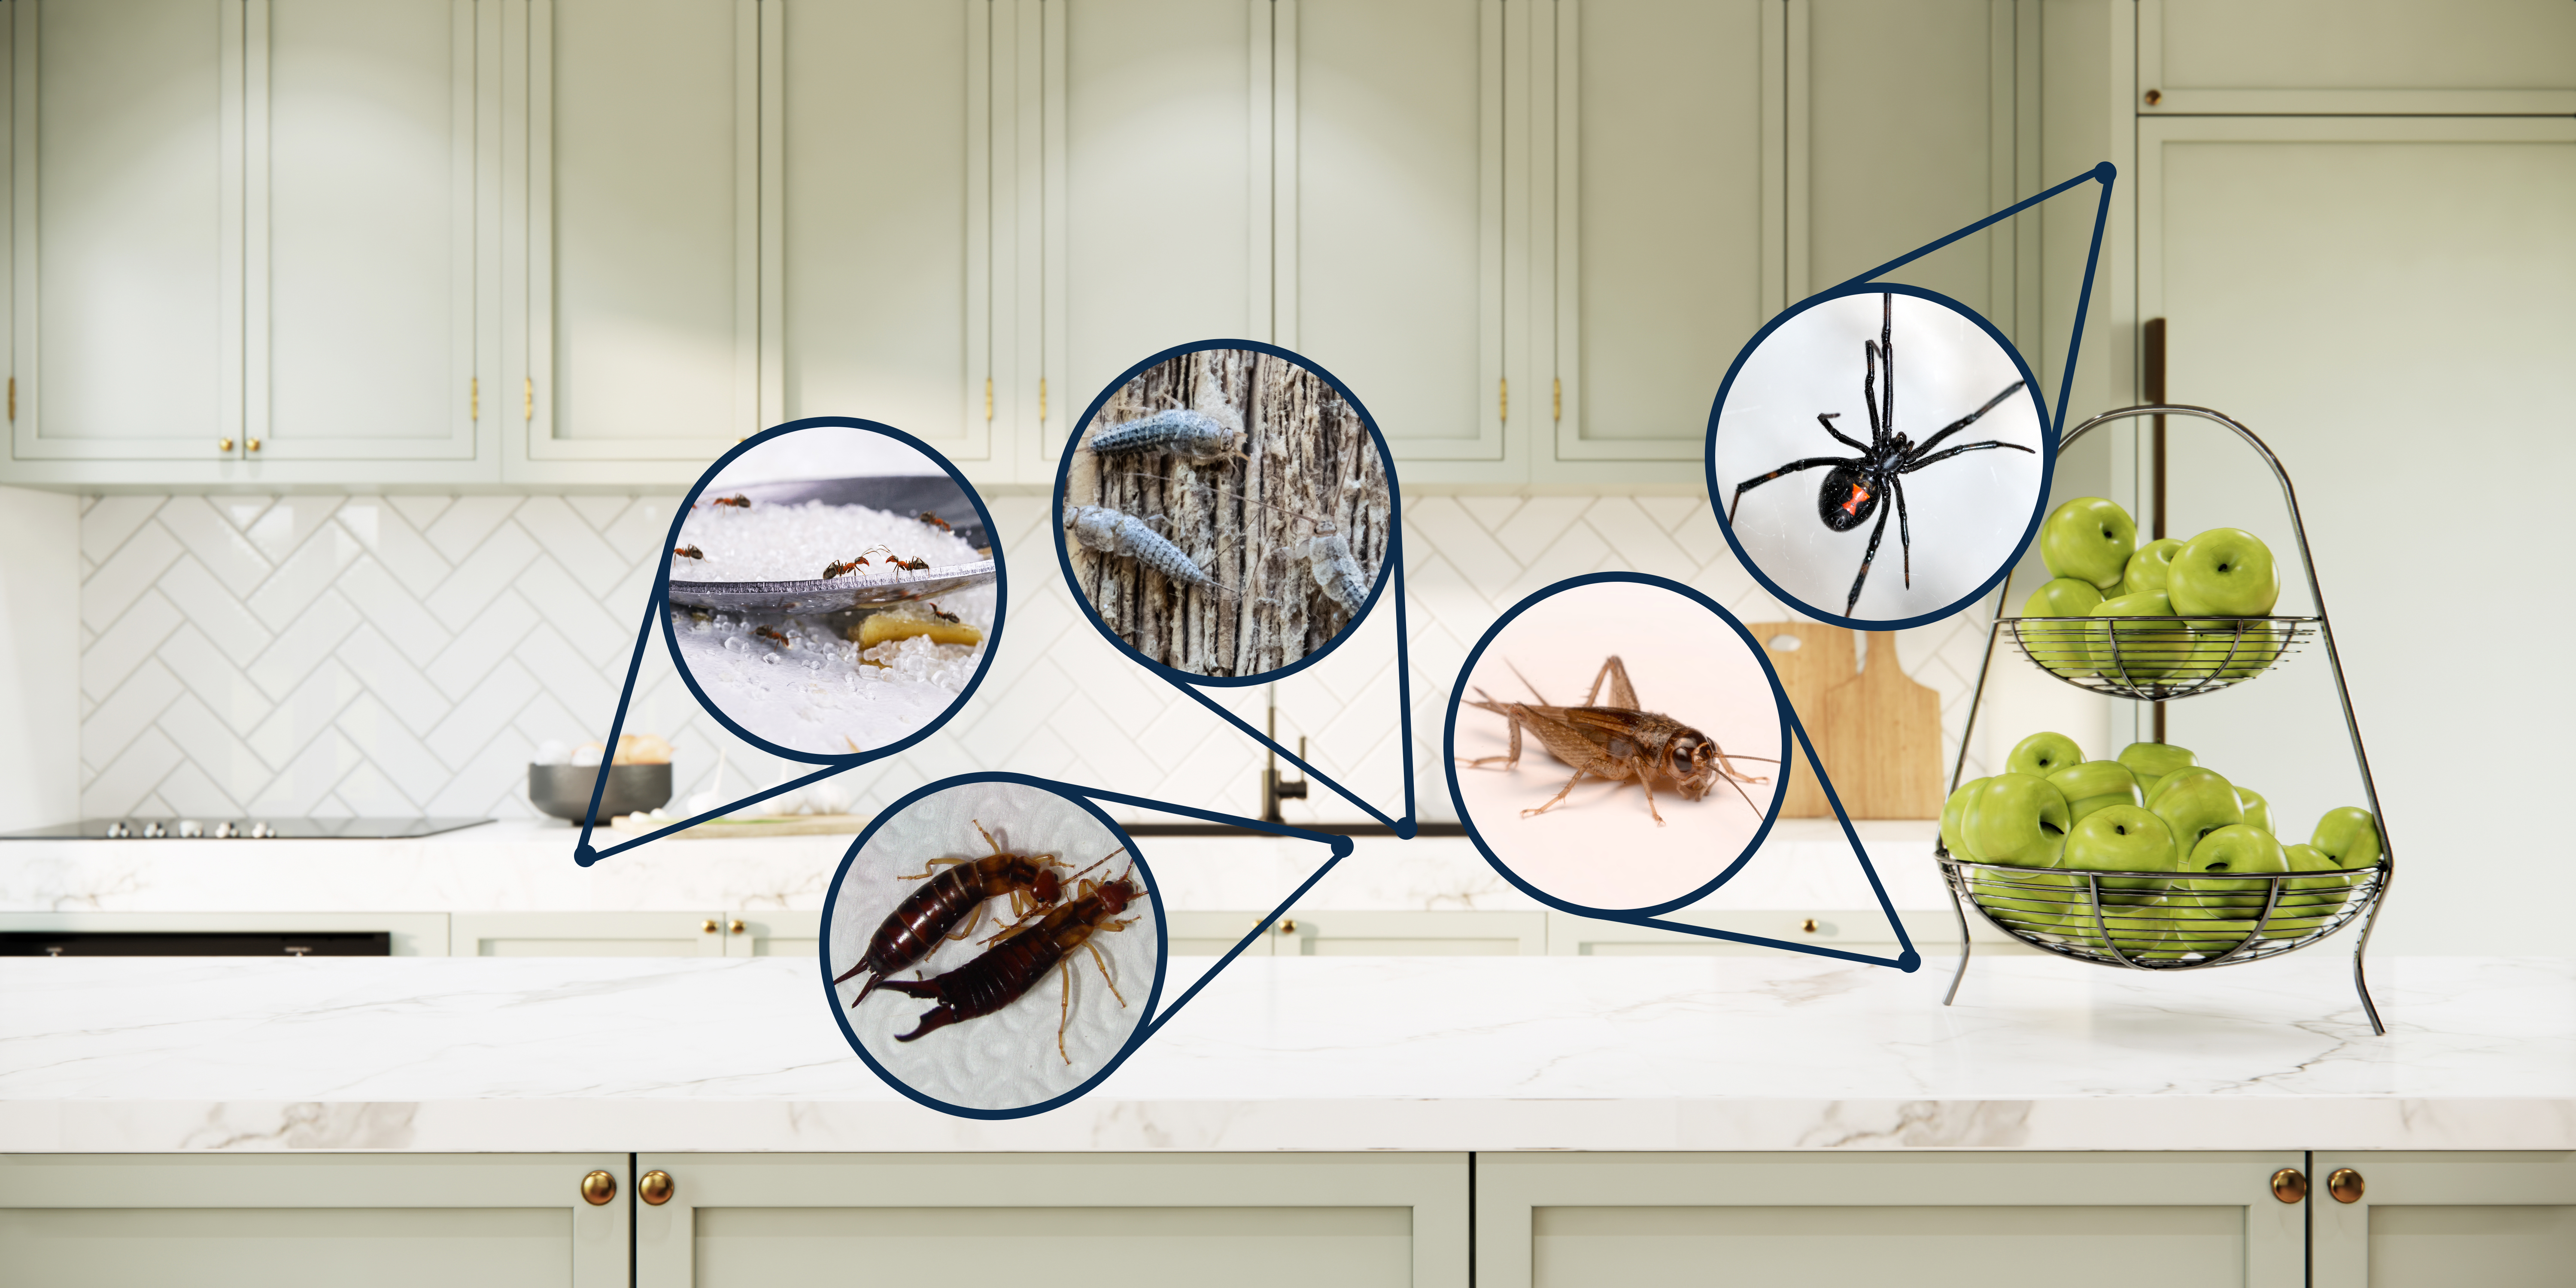 Kitchen cabinets and countertops showing close ups of pests: ants, silverfish, earwigs, spiders and crickets.